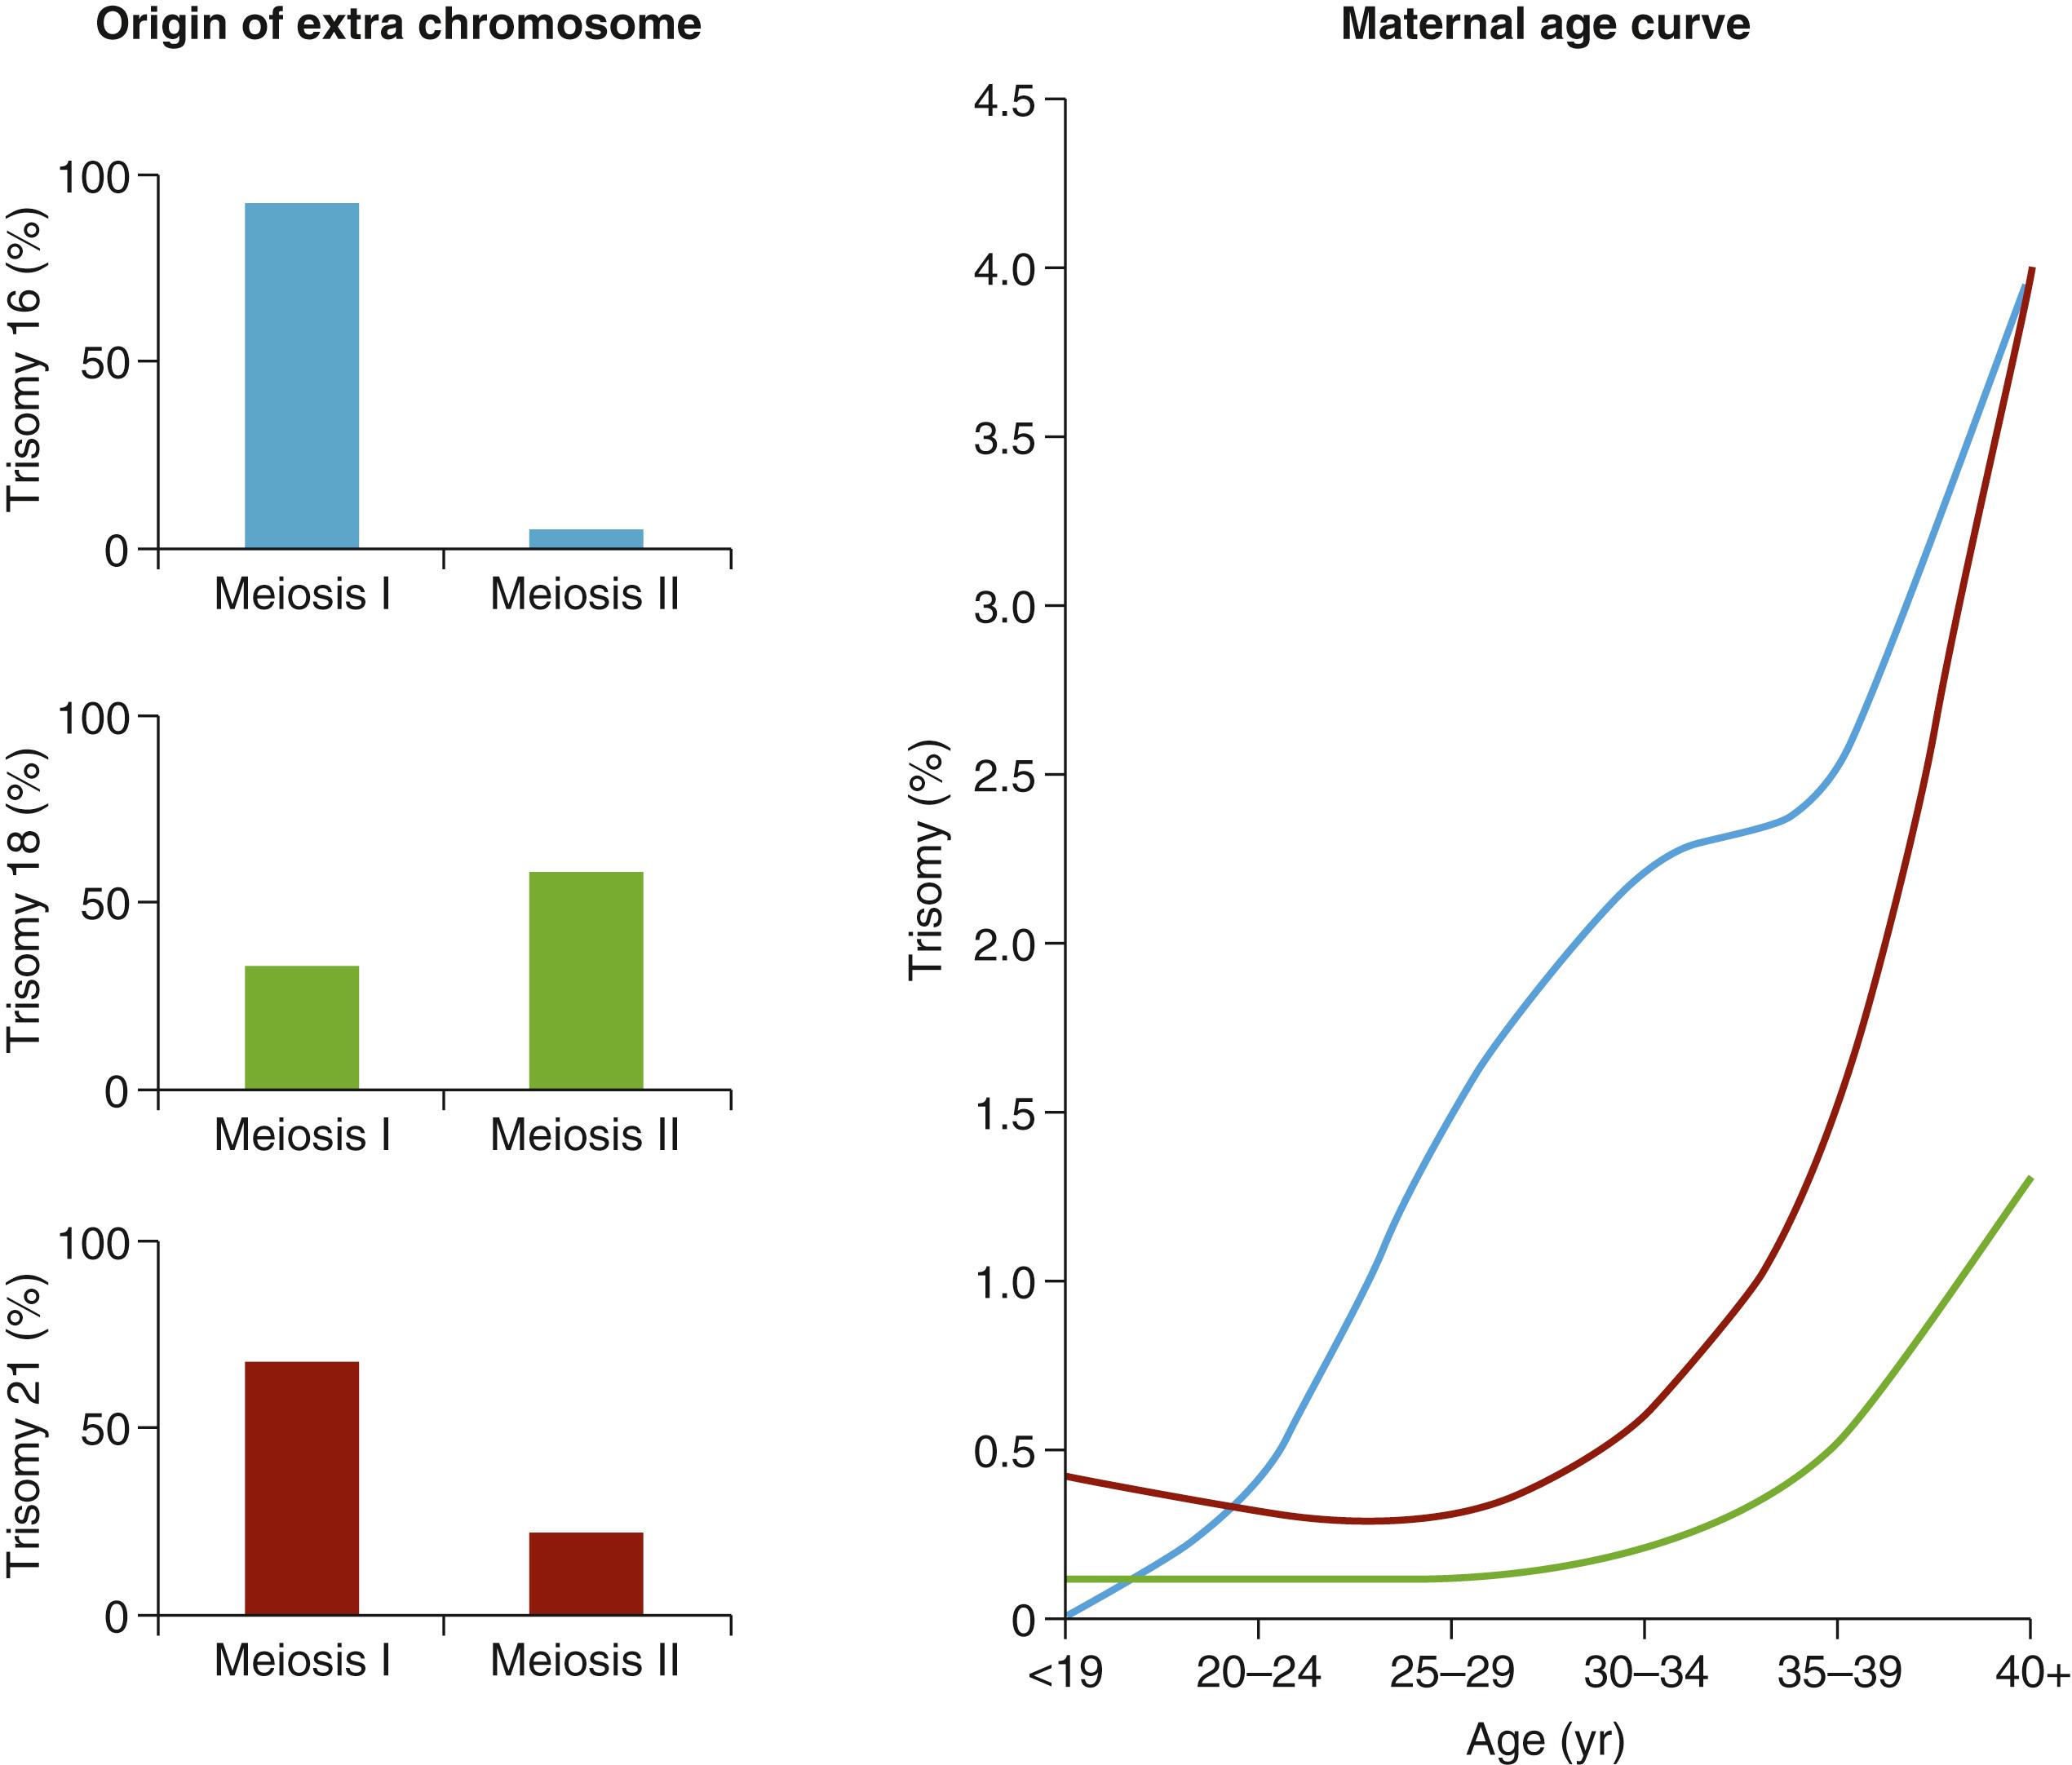 Fig. 173.1, The relative contribution of meiosis I and meiosis II errors to trisomy formation, and the relationship with maternal age, varies by chromosome.